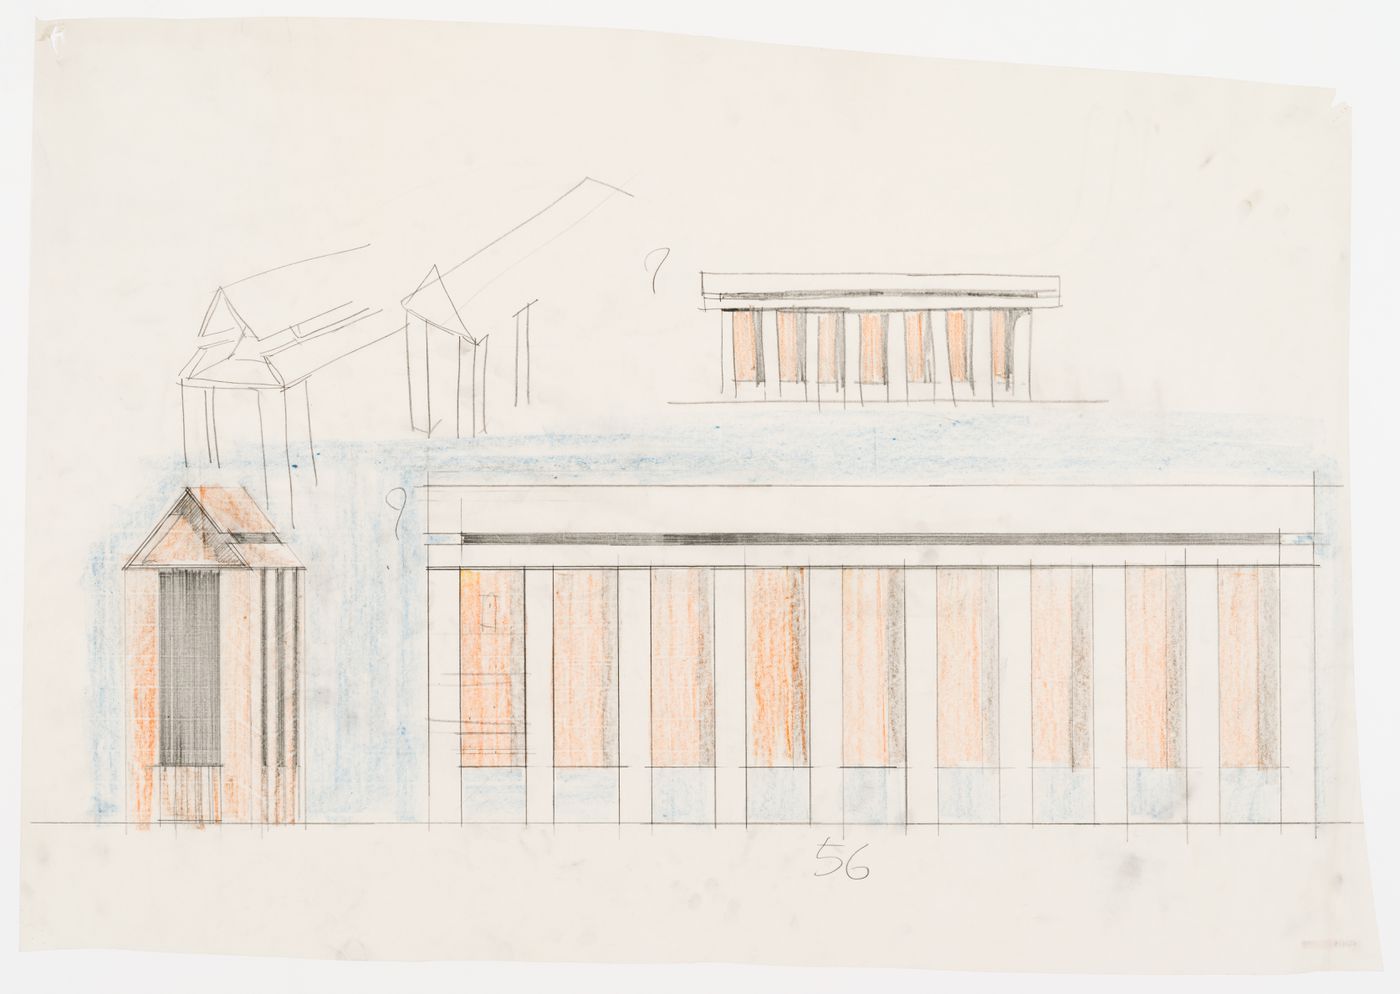 Competition project for a theatre and organization of the Pilotta area, Parma, Italy: elevations and perspective sketches for the portico